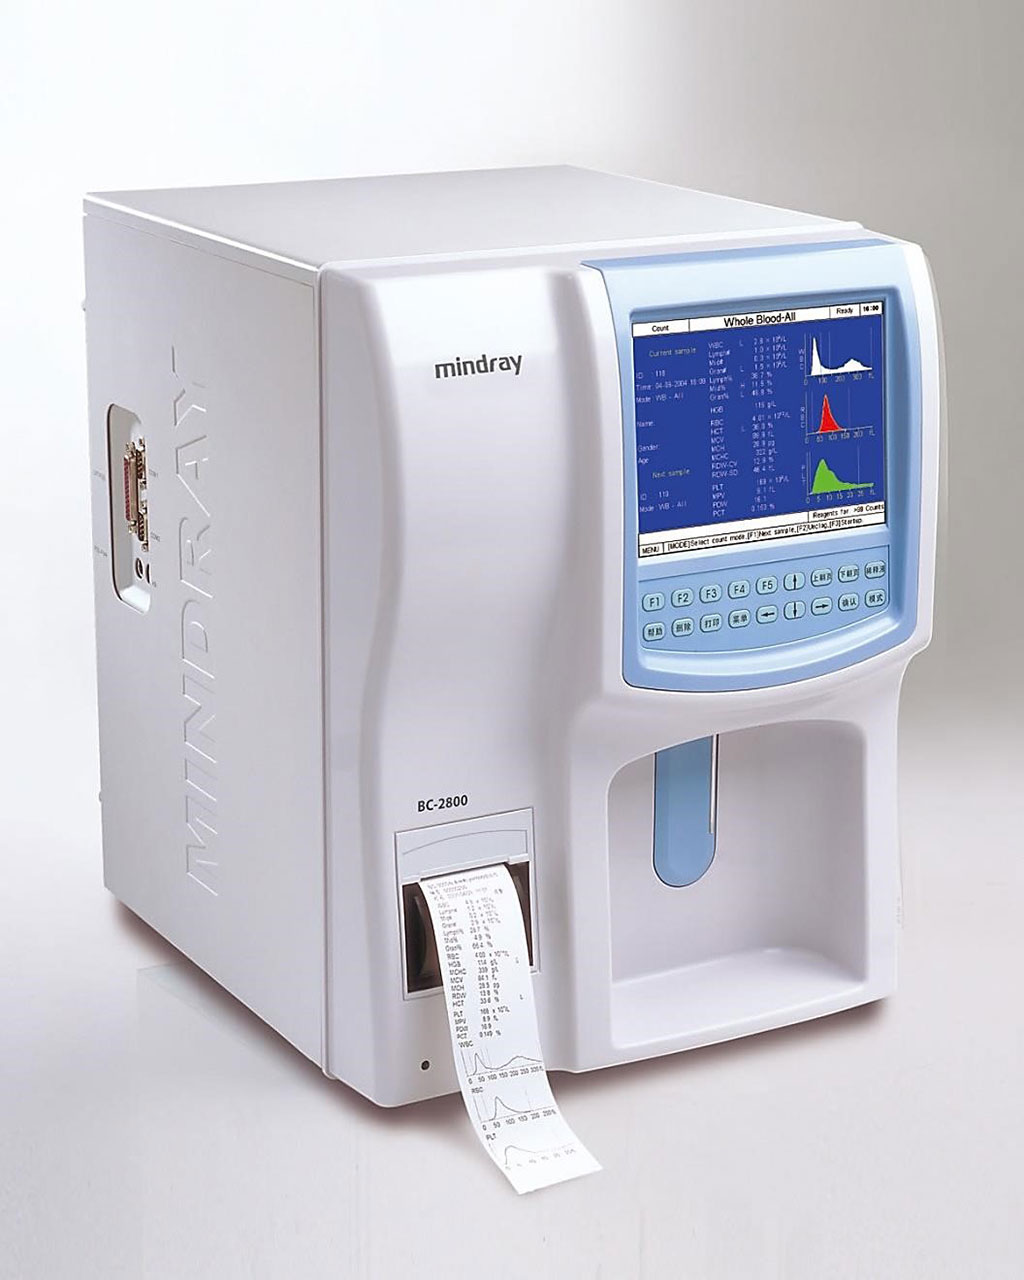 Image: The Mindray BC-2800 Fully Automatic Hematology Analyzer with 19 Parameters for CBC /Blood Cell Test for Hospital Use (Photo courtesy of Mindray).